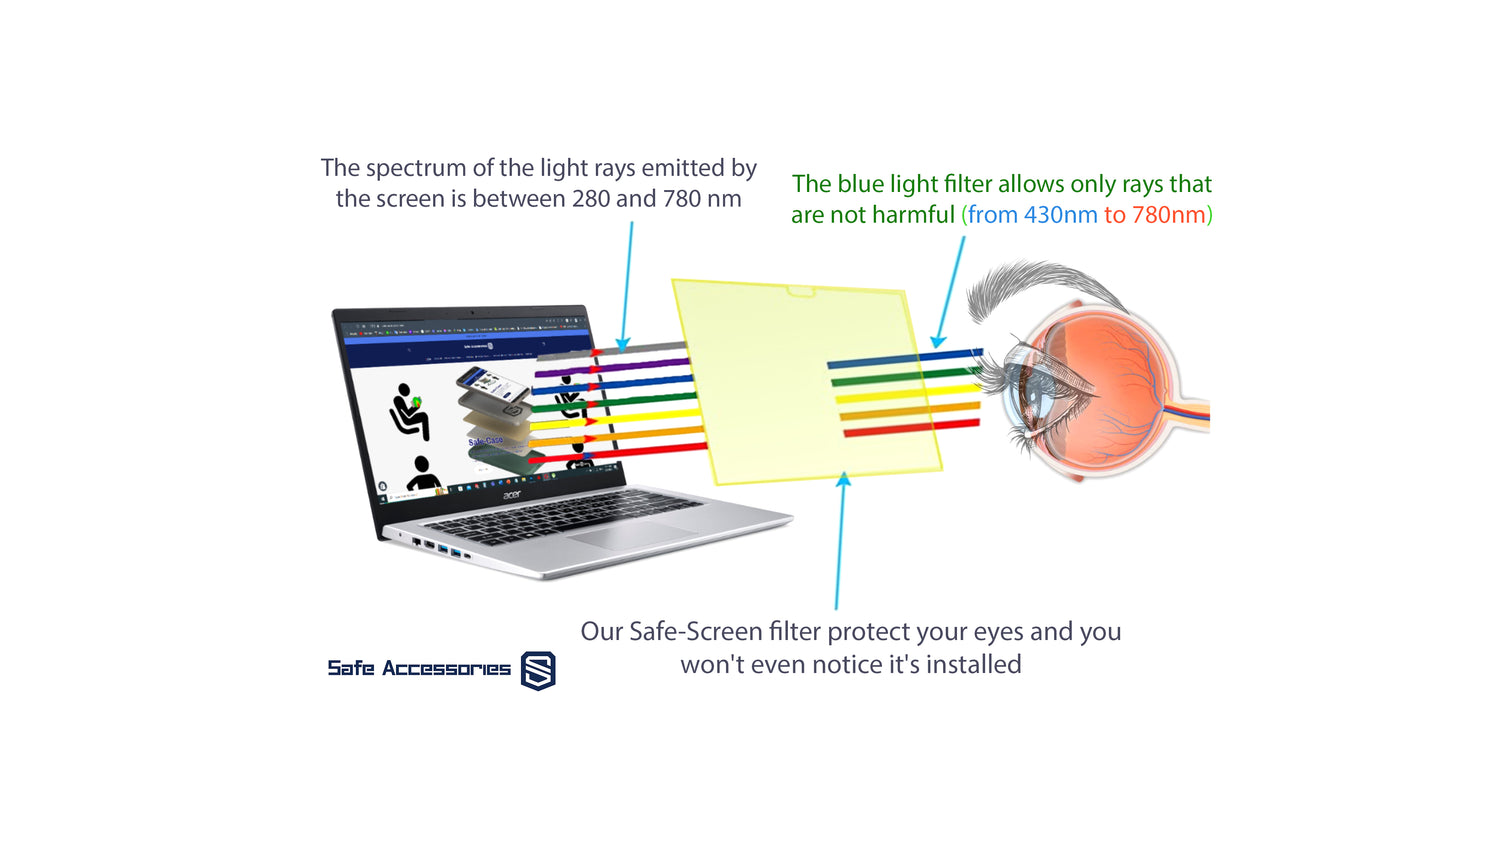 Anti blue light filter for all screens TV, Laptop, Tablets and mobile phones